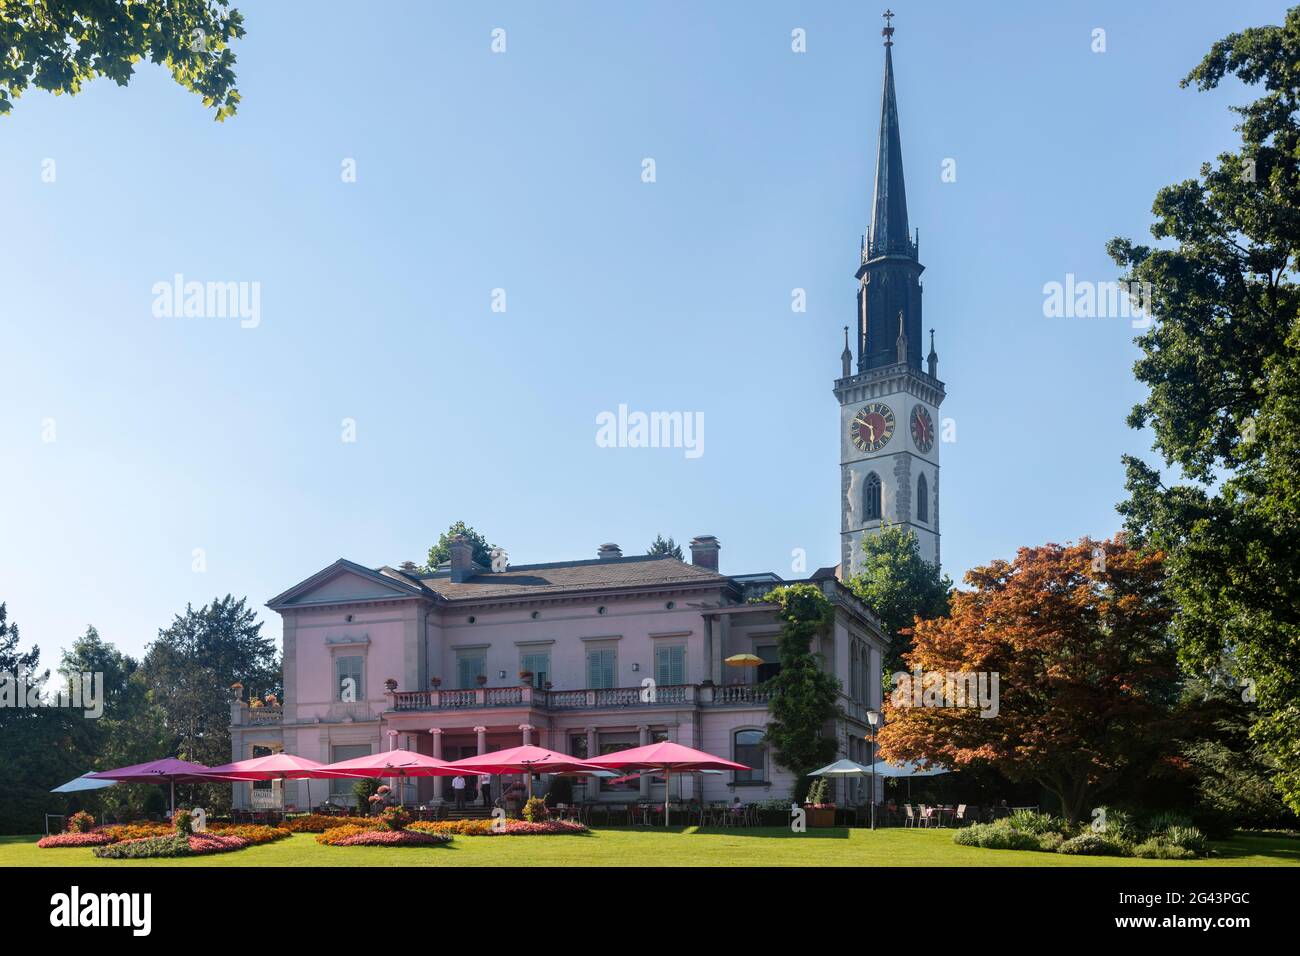 Zug Restaurant High Resolution Stock Photography and Images - Alamy